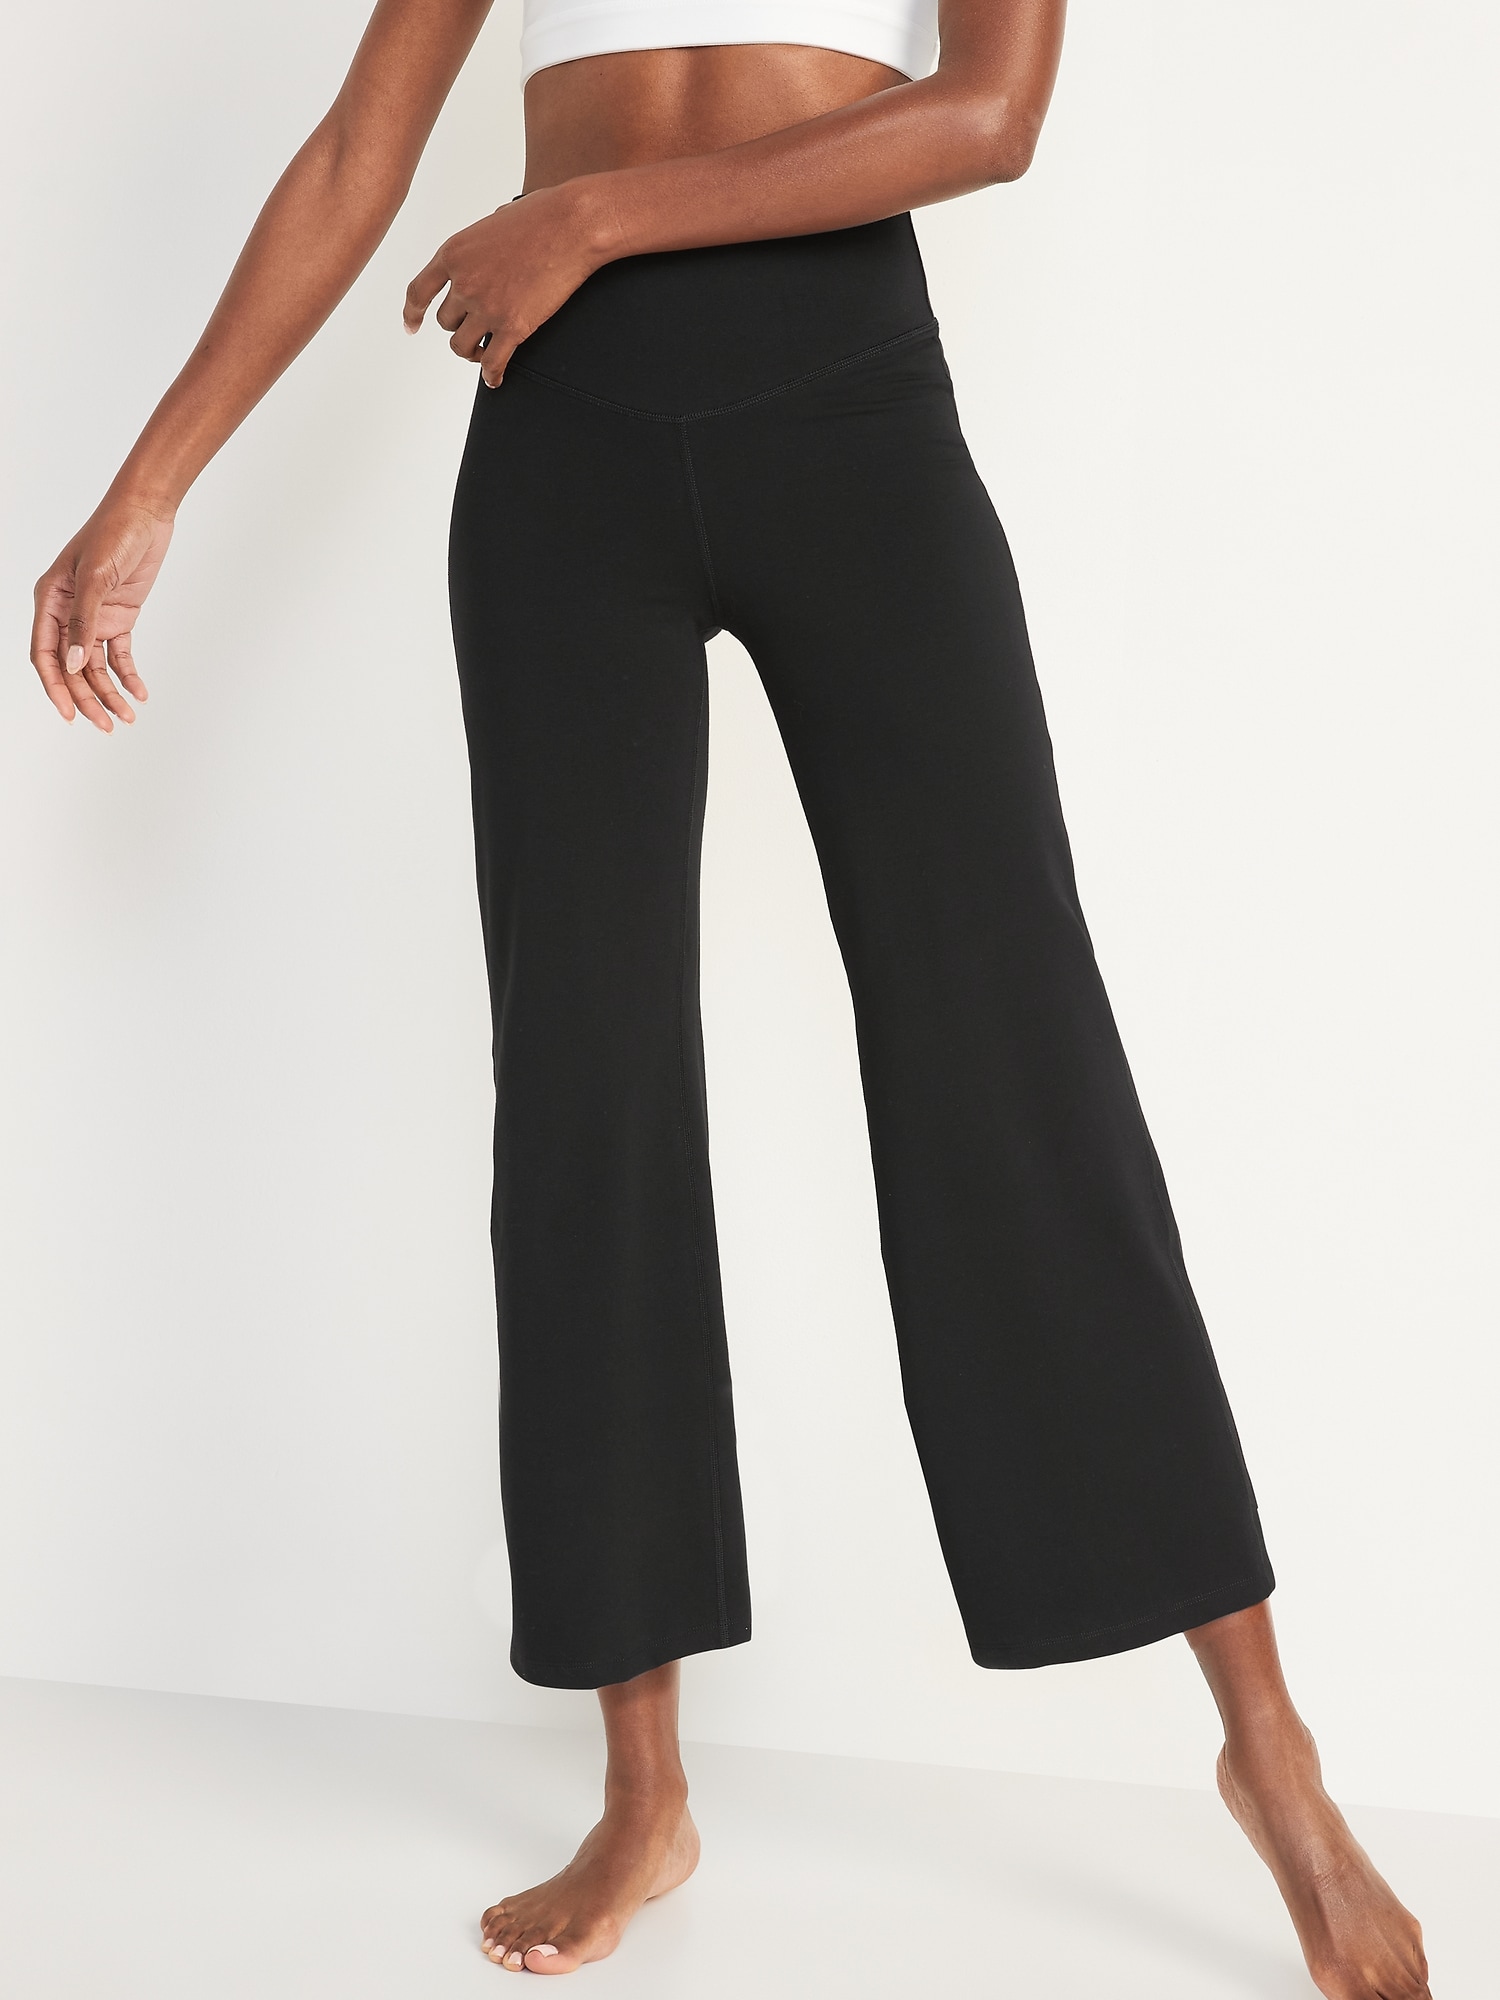 Old Navy Extra High-Waisted PowerChill Crop Leggings for Women